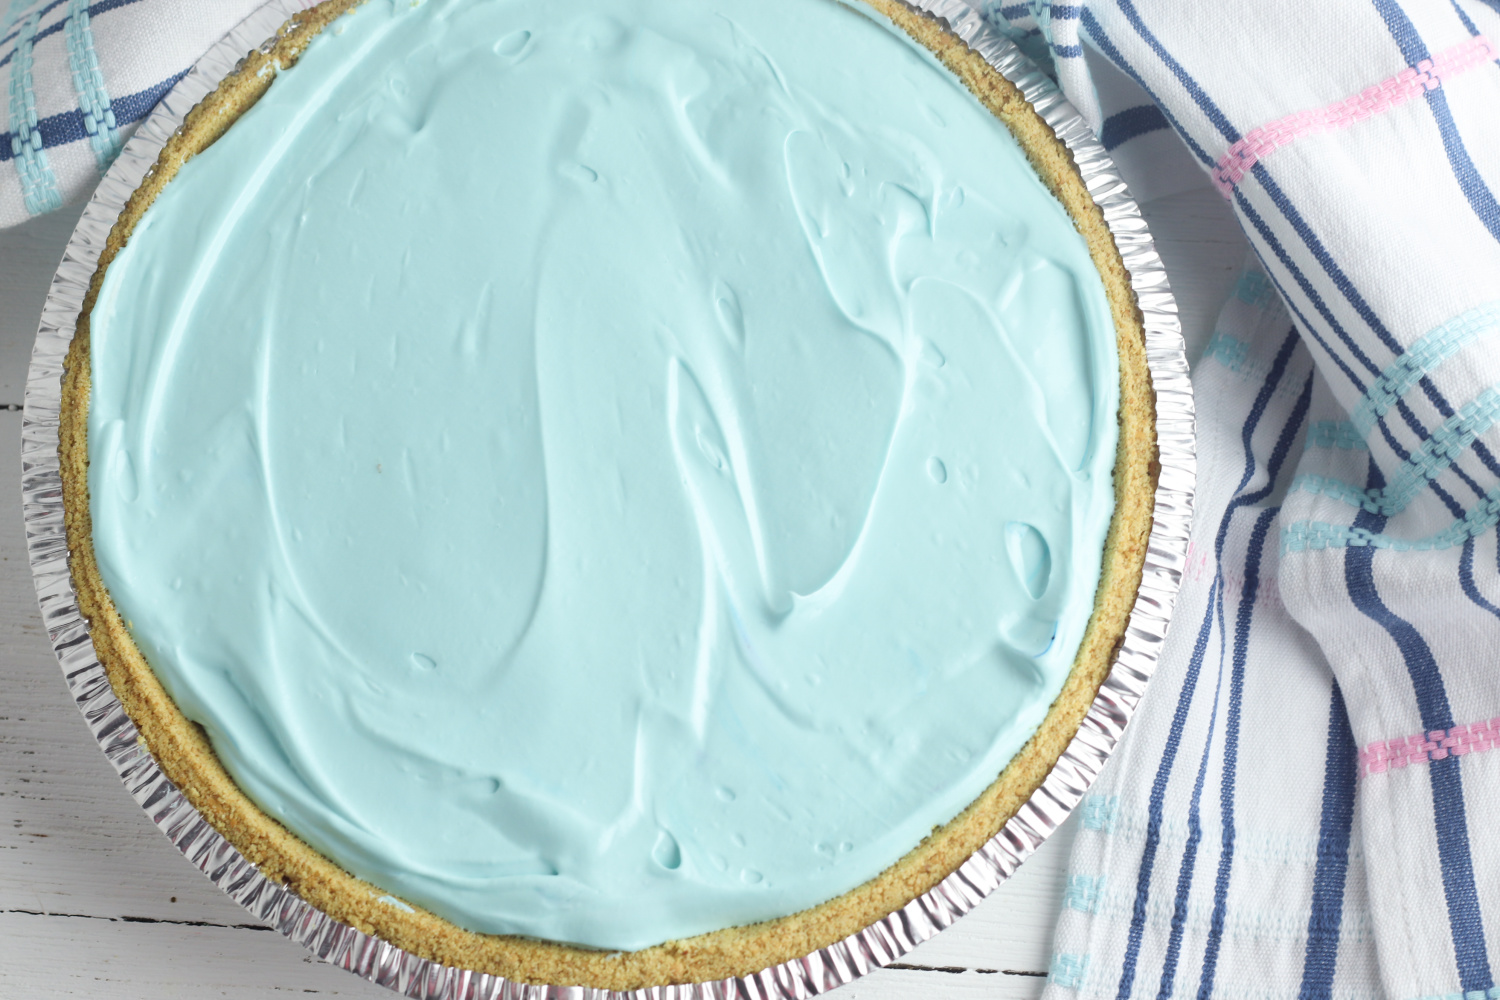 Kool Aid Pie Instructions include chilling the pie in the refrigerator for 4 hours. 